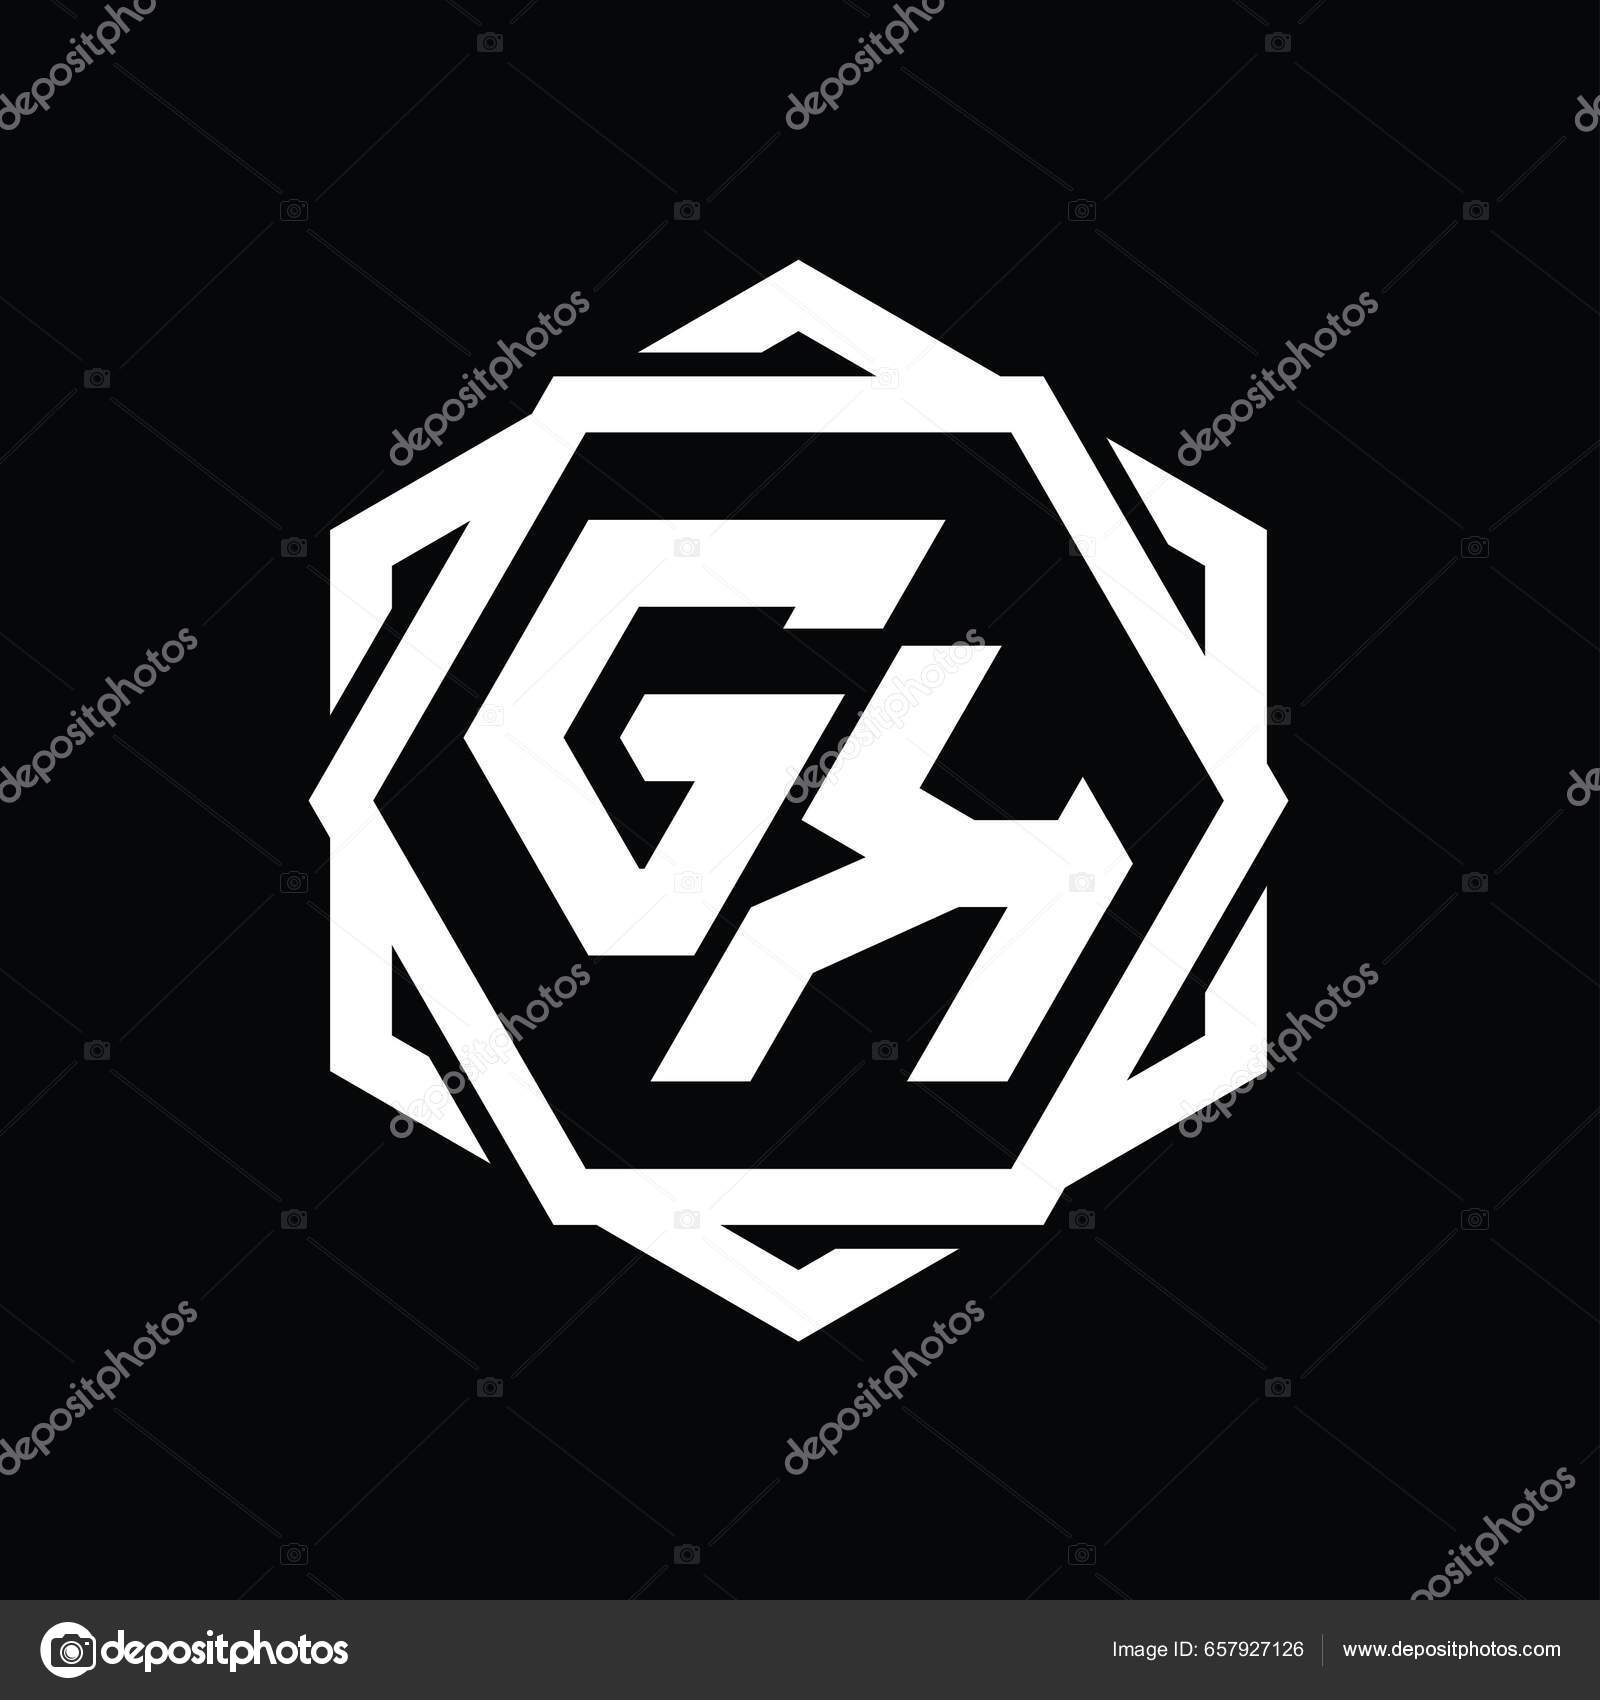 Gm logo monogram with shield shape isolated Vector Image